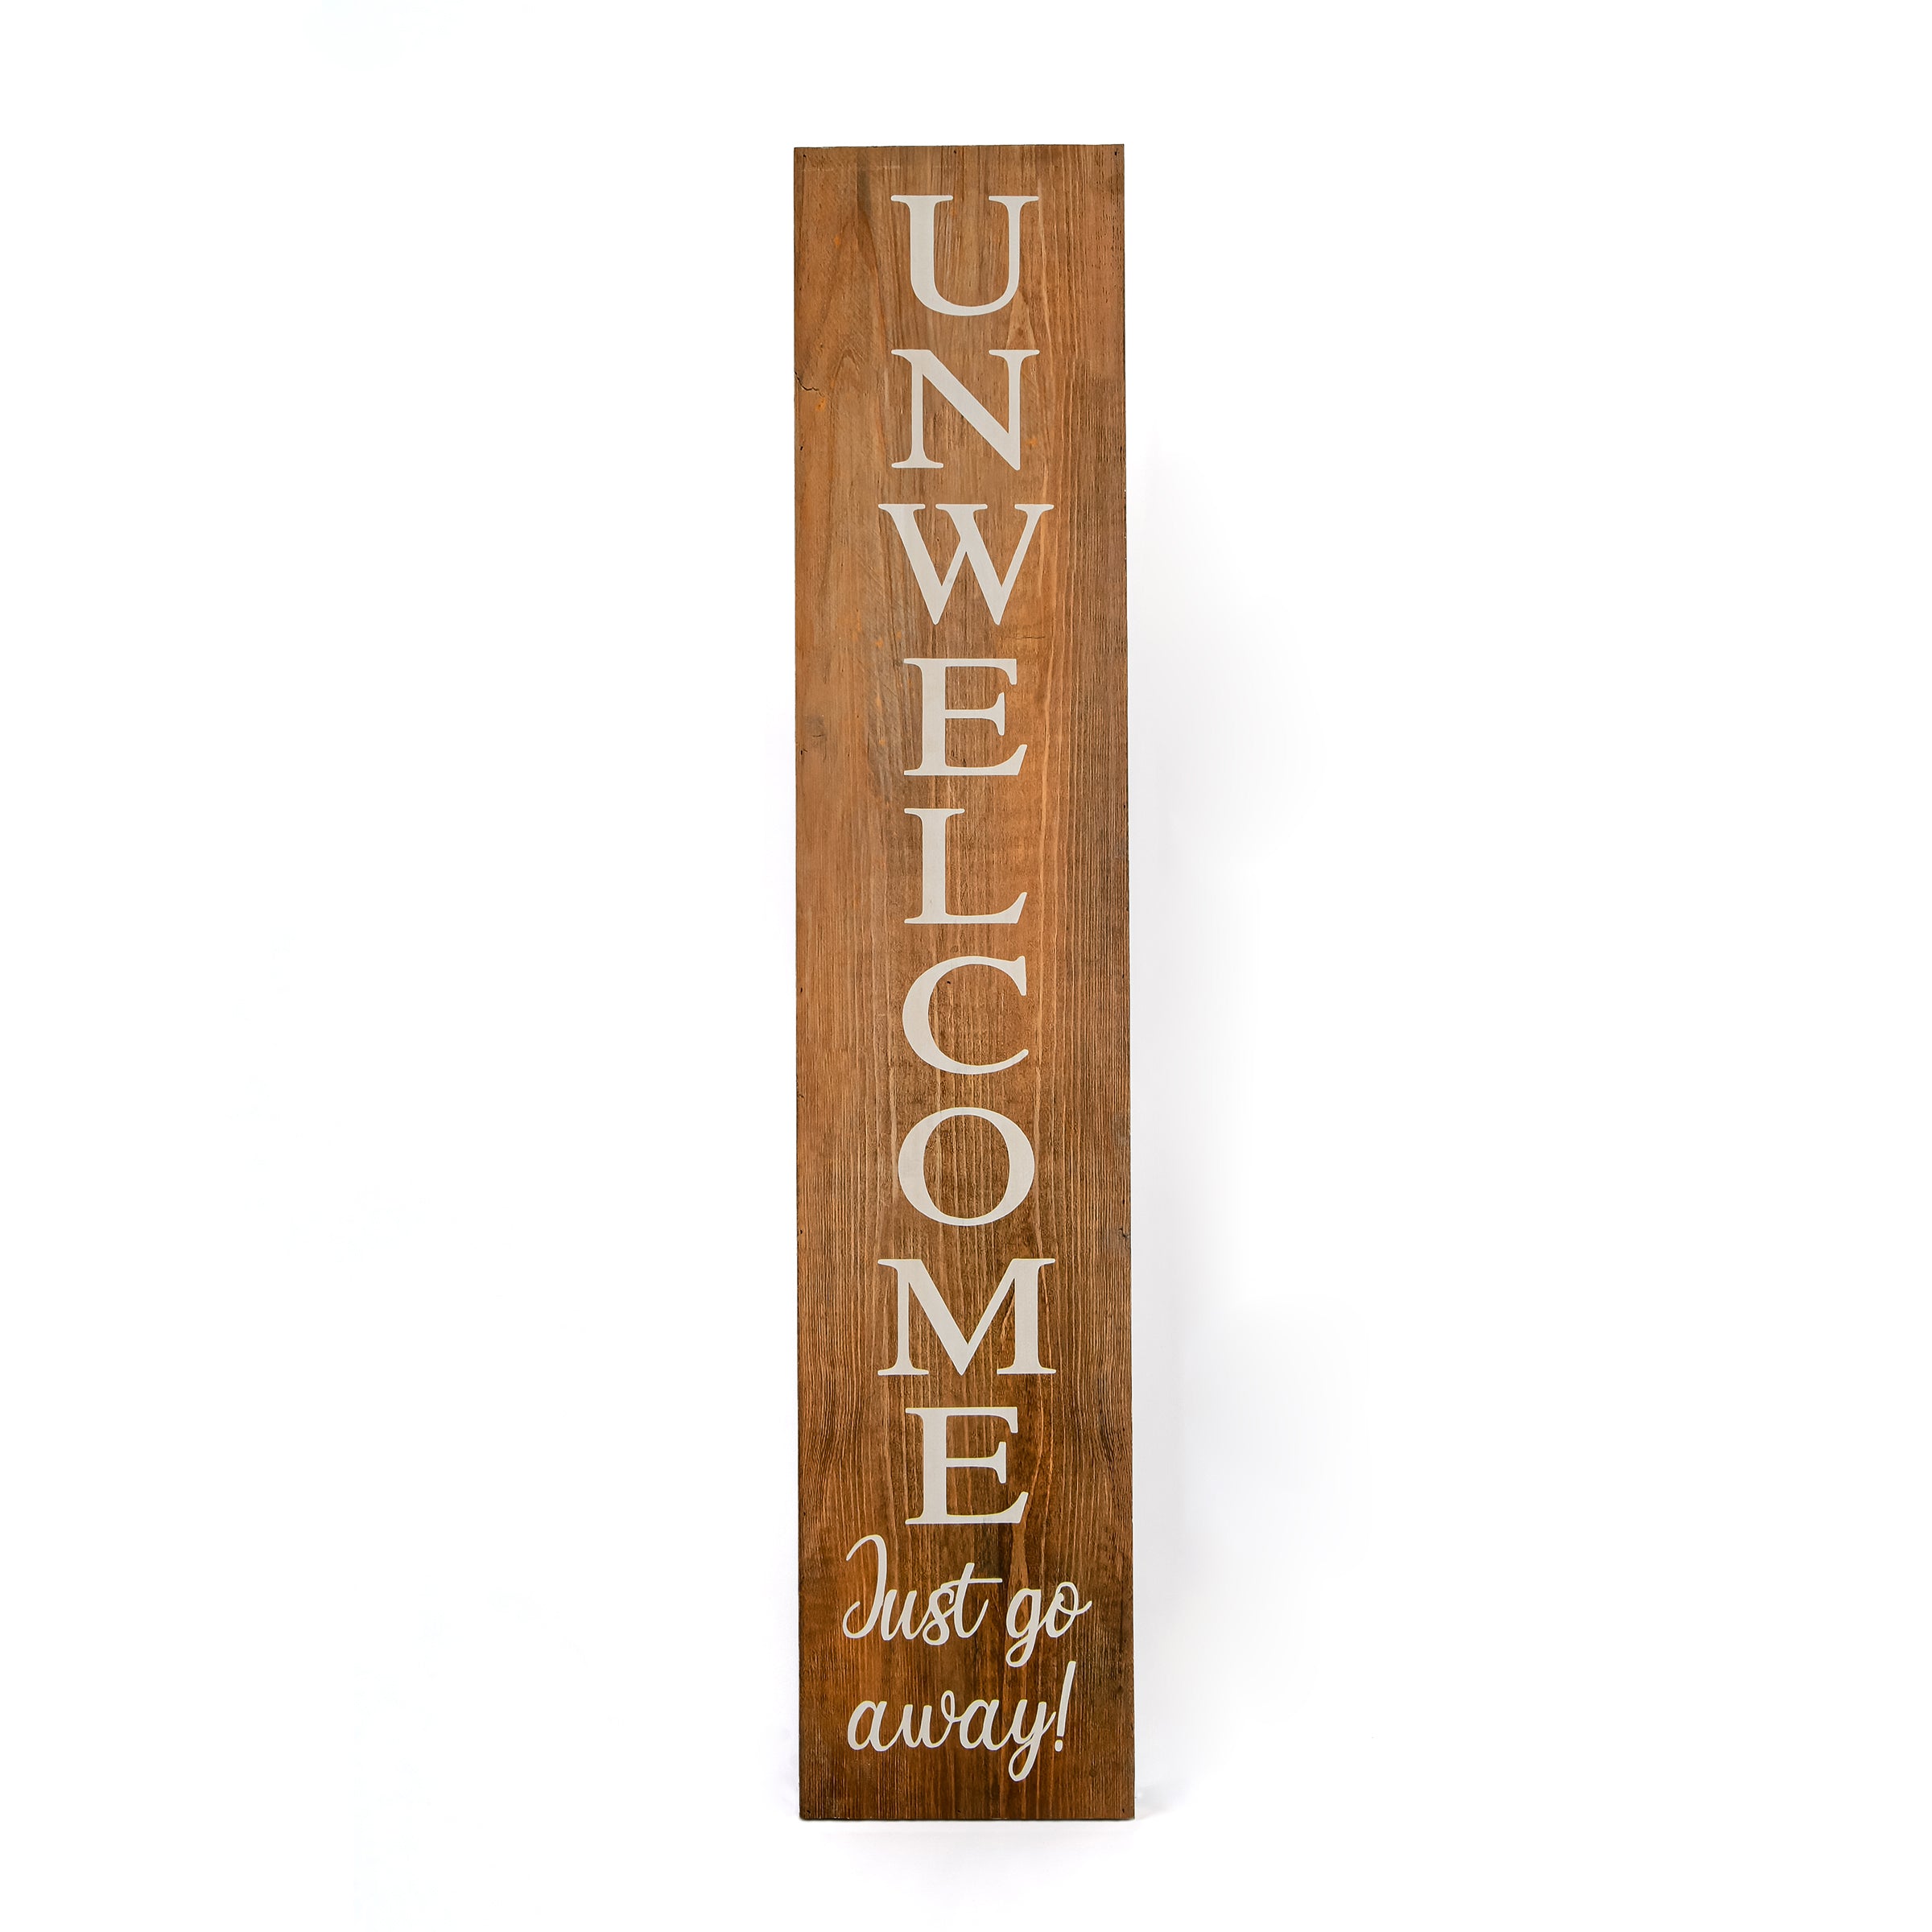 Halloween Hanging Porch Sign, Natural, 'Unwelcome, Just Go Away', Wooden Construction, 39 Inches